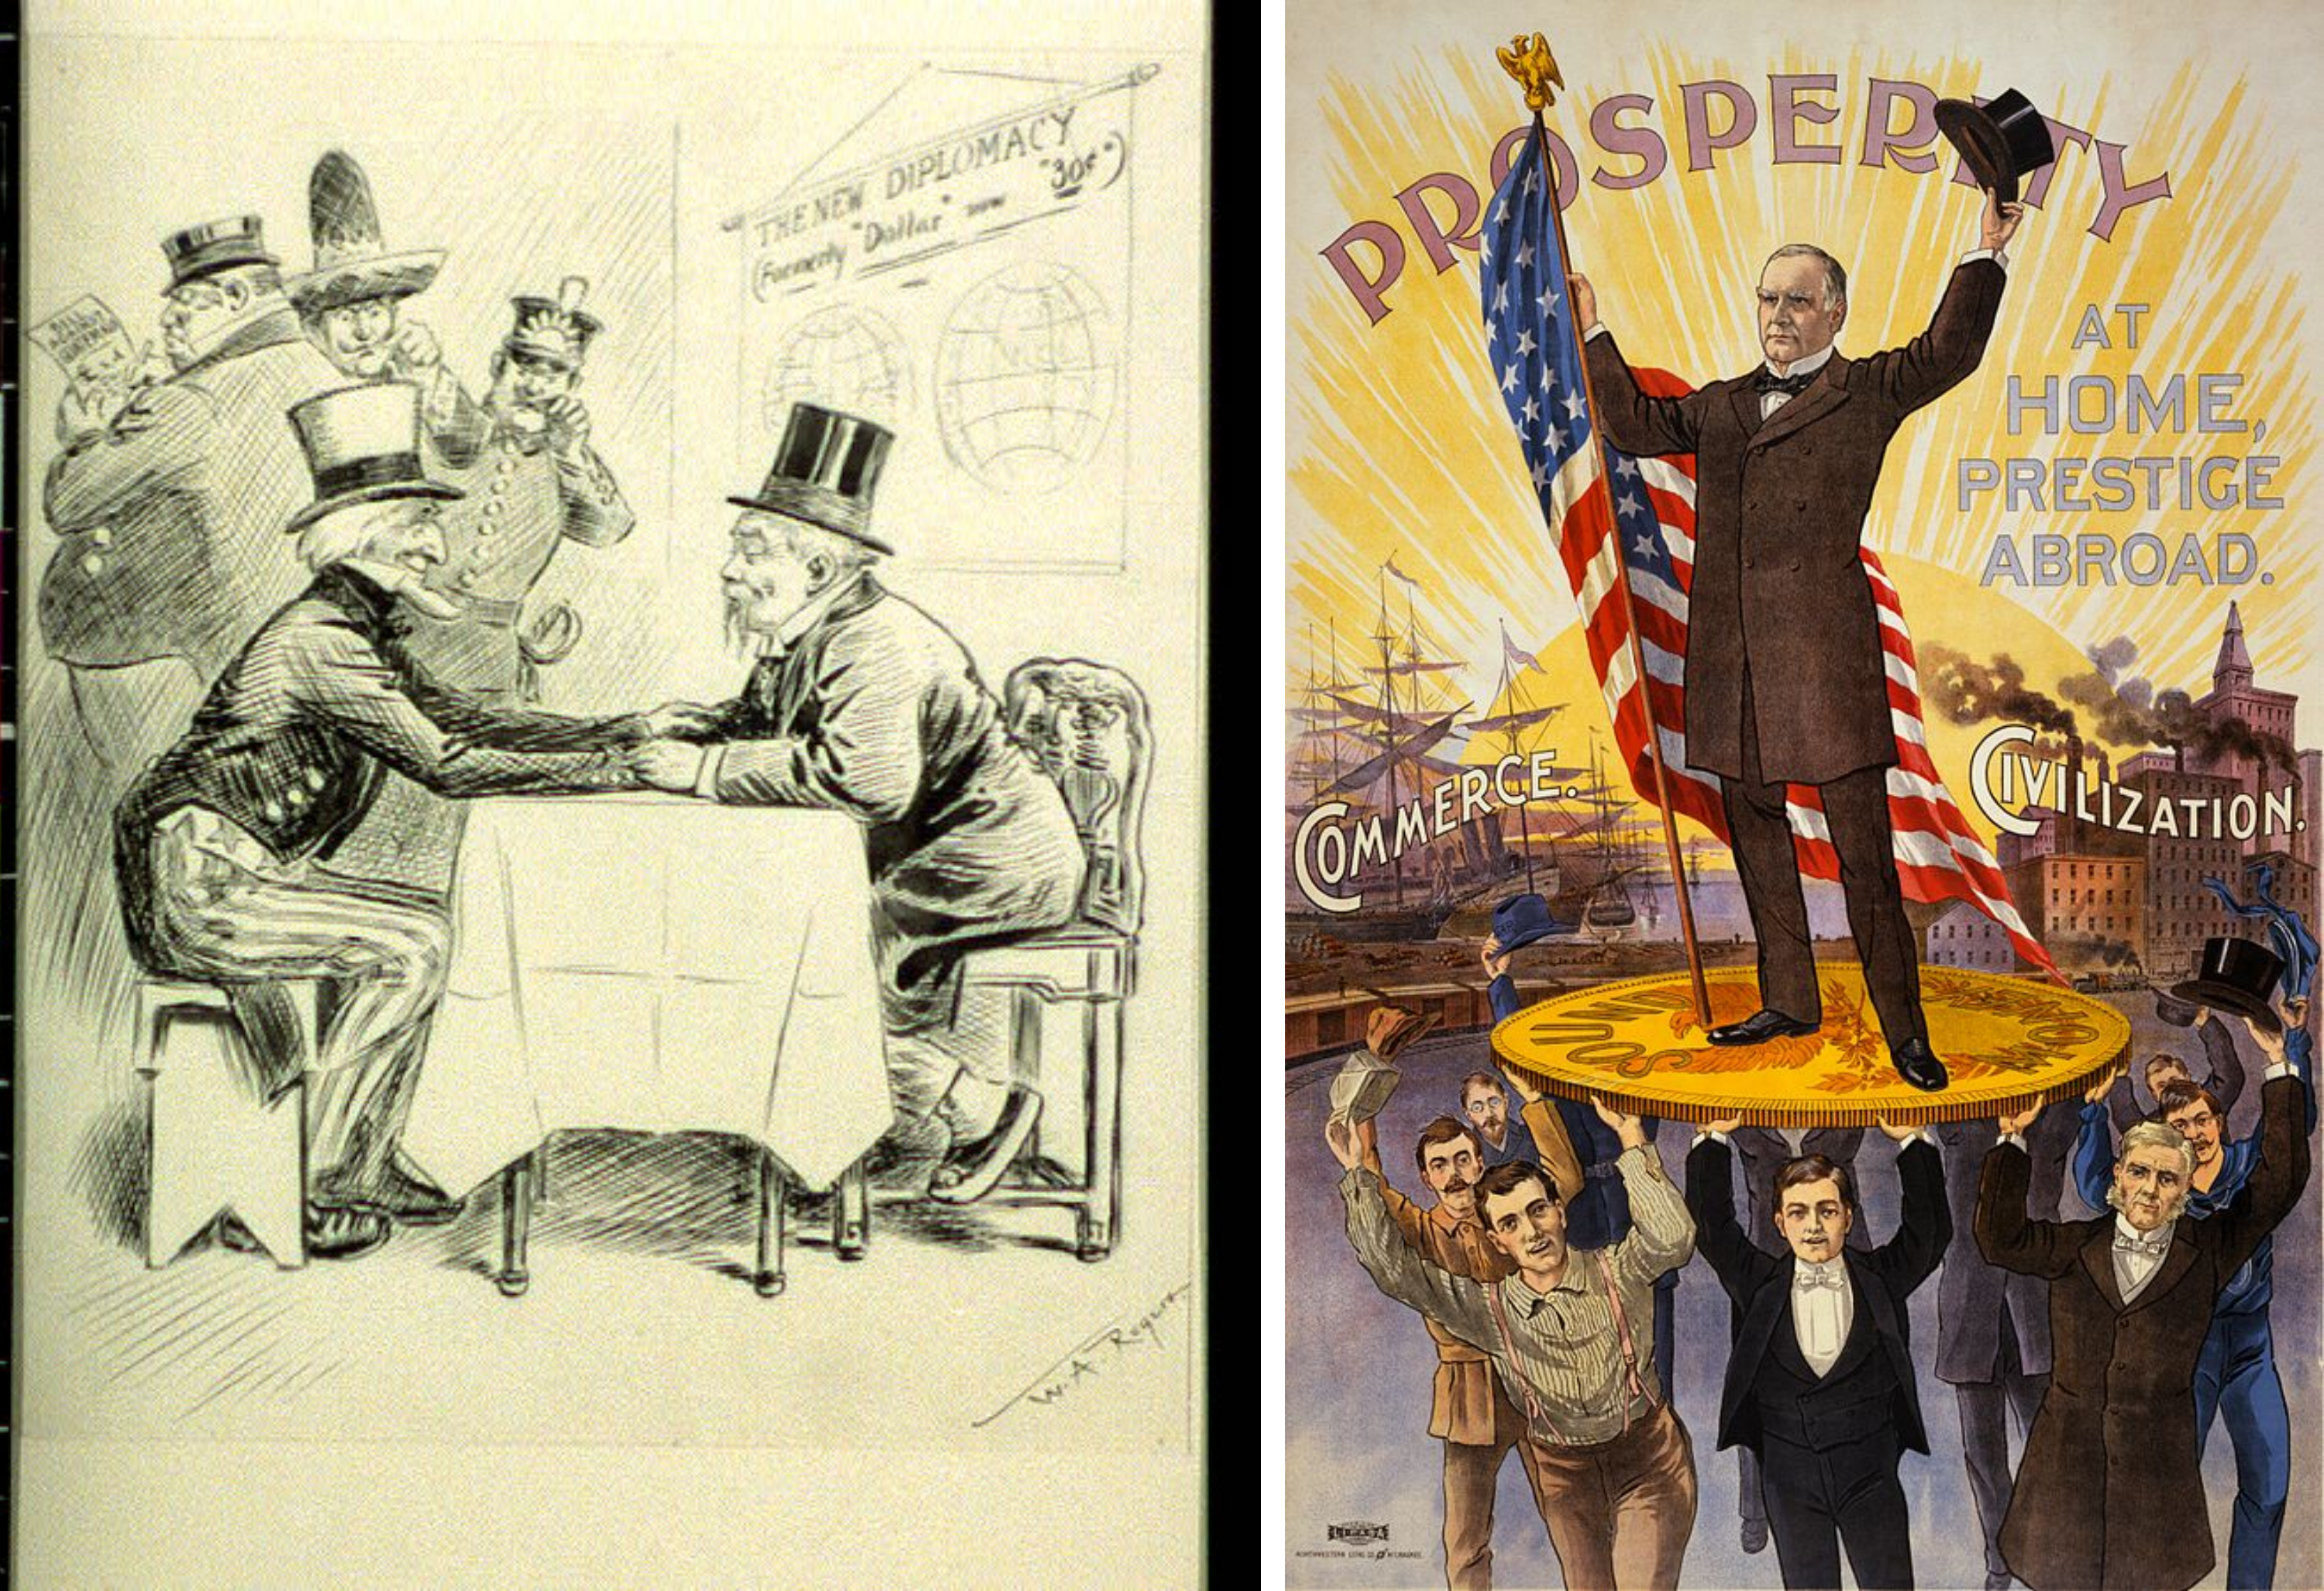 On the left, a political cartoon from 1913 in which Uncle Sam sits at a table with a Chinese official while representations of Great Britain, Mexico, and Japan look on. On the right, a campaign poster showing William McKinley holding U.S. flag and standing on gold coin 'sound money.'